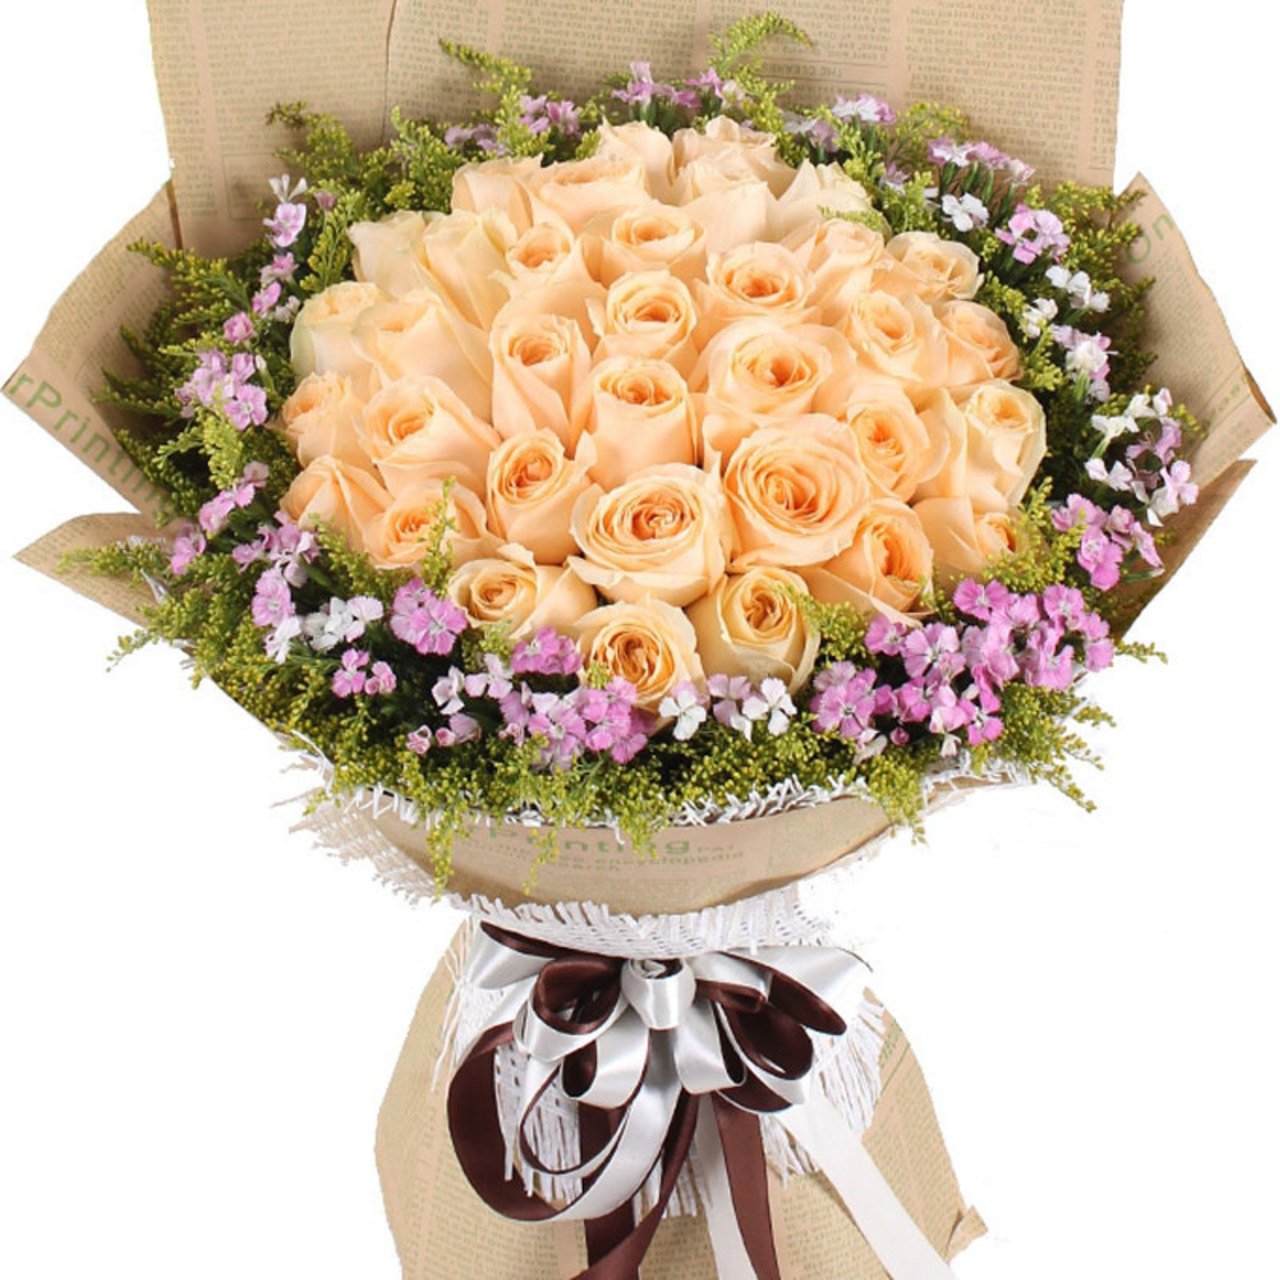 To be with you(33 champagne roses)